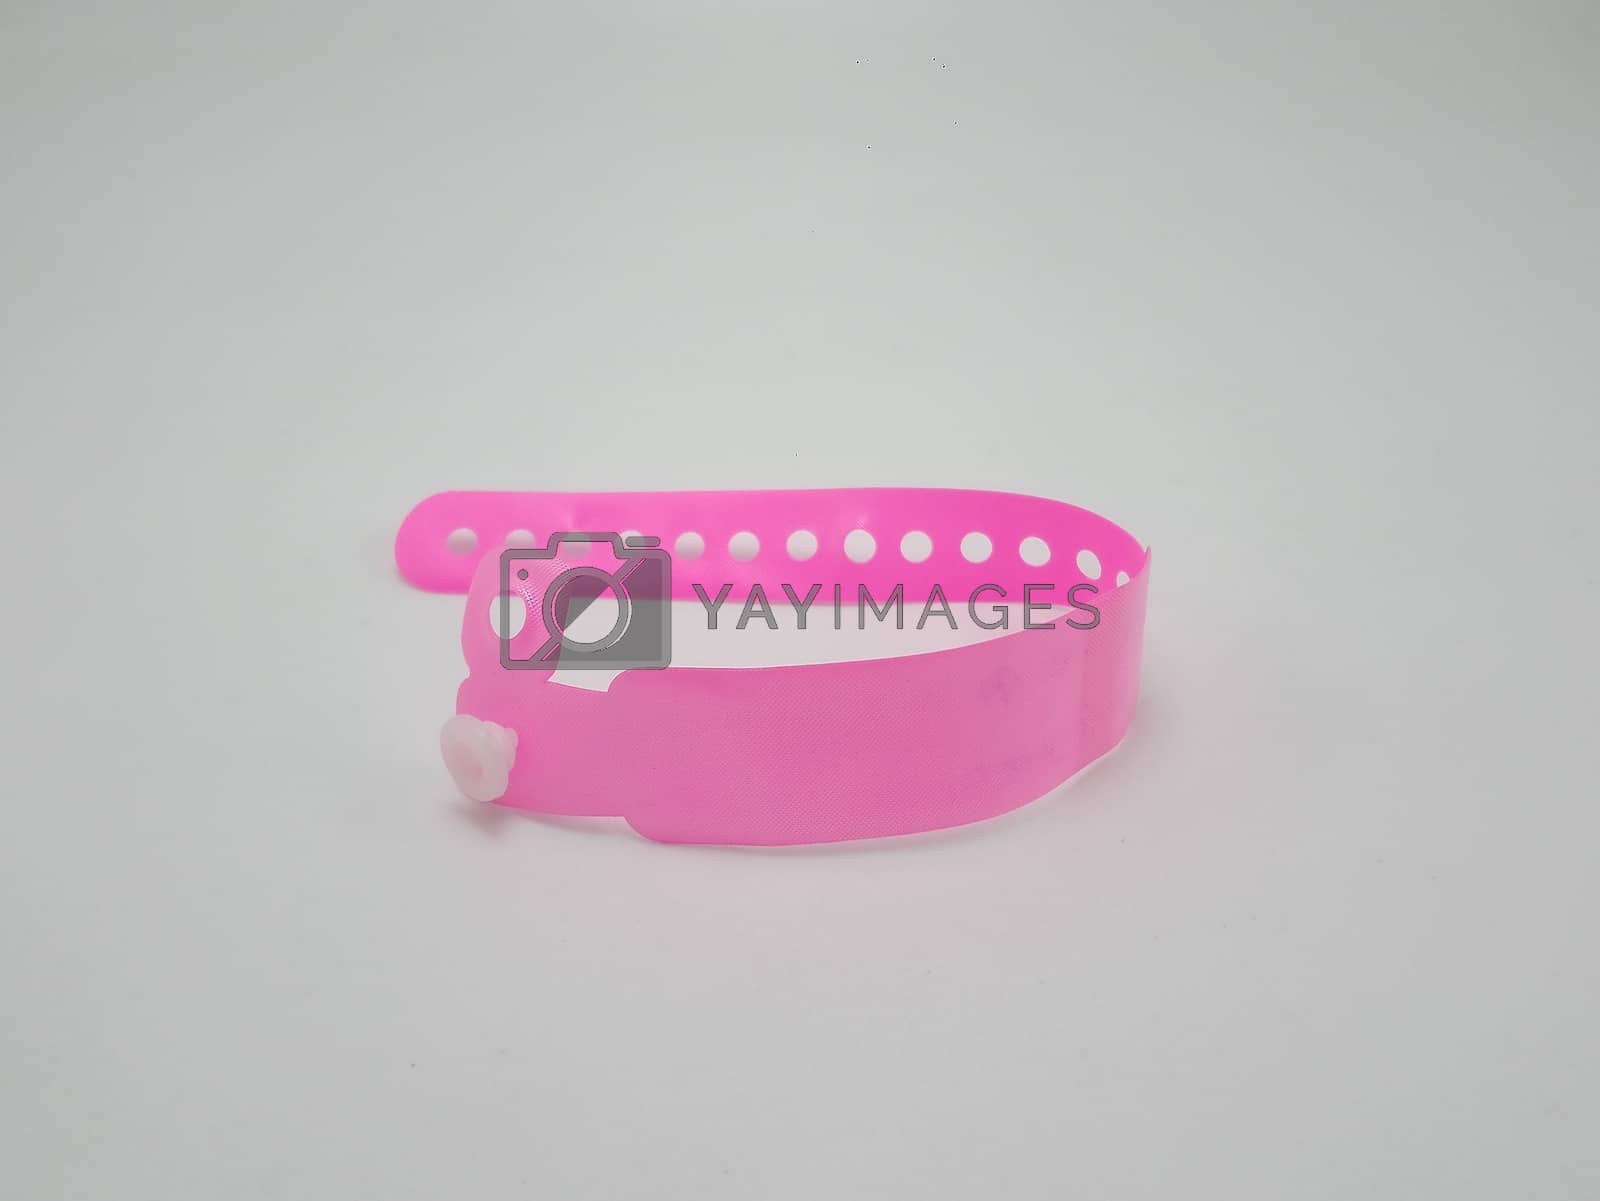 Royalty free image of Pink baby name tag wrist ankle binder by imwaltersy